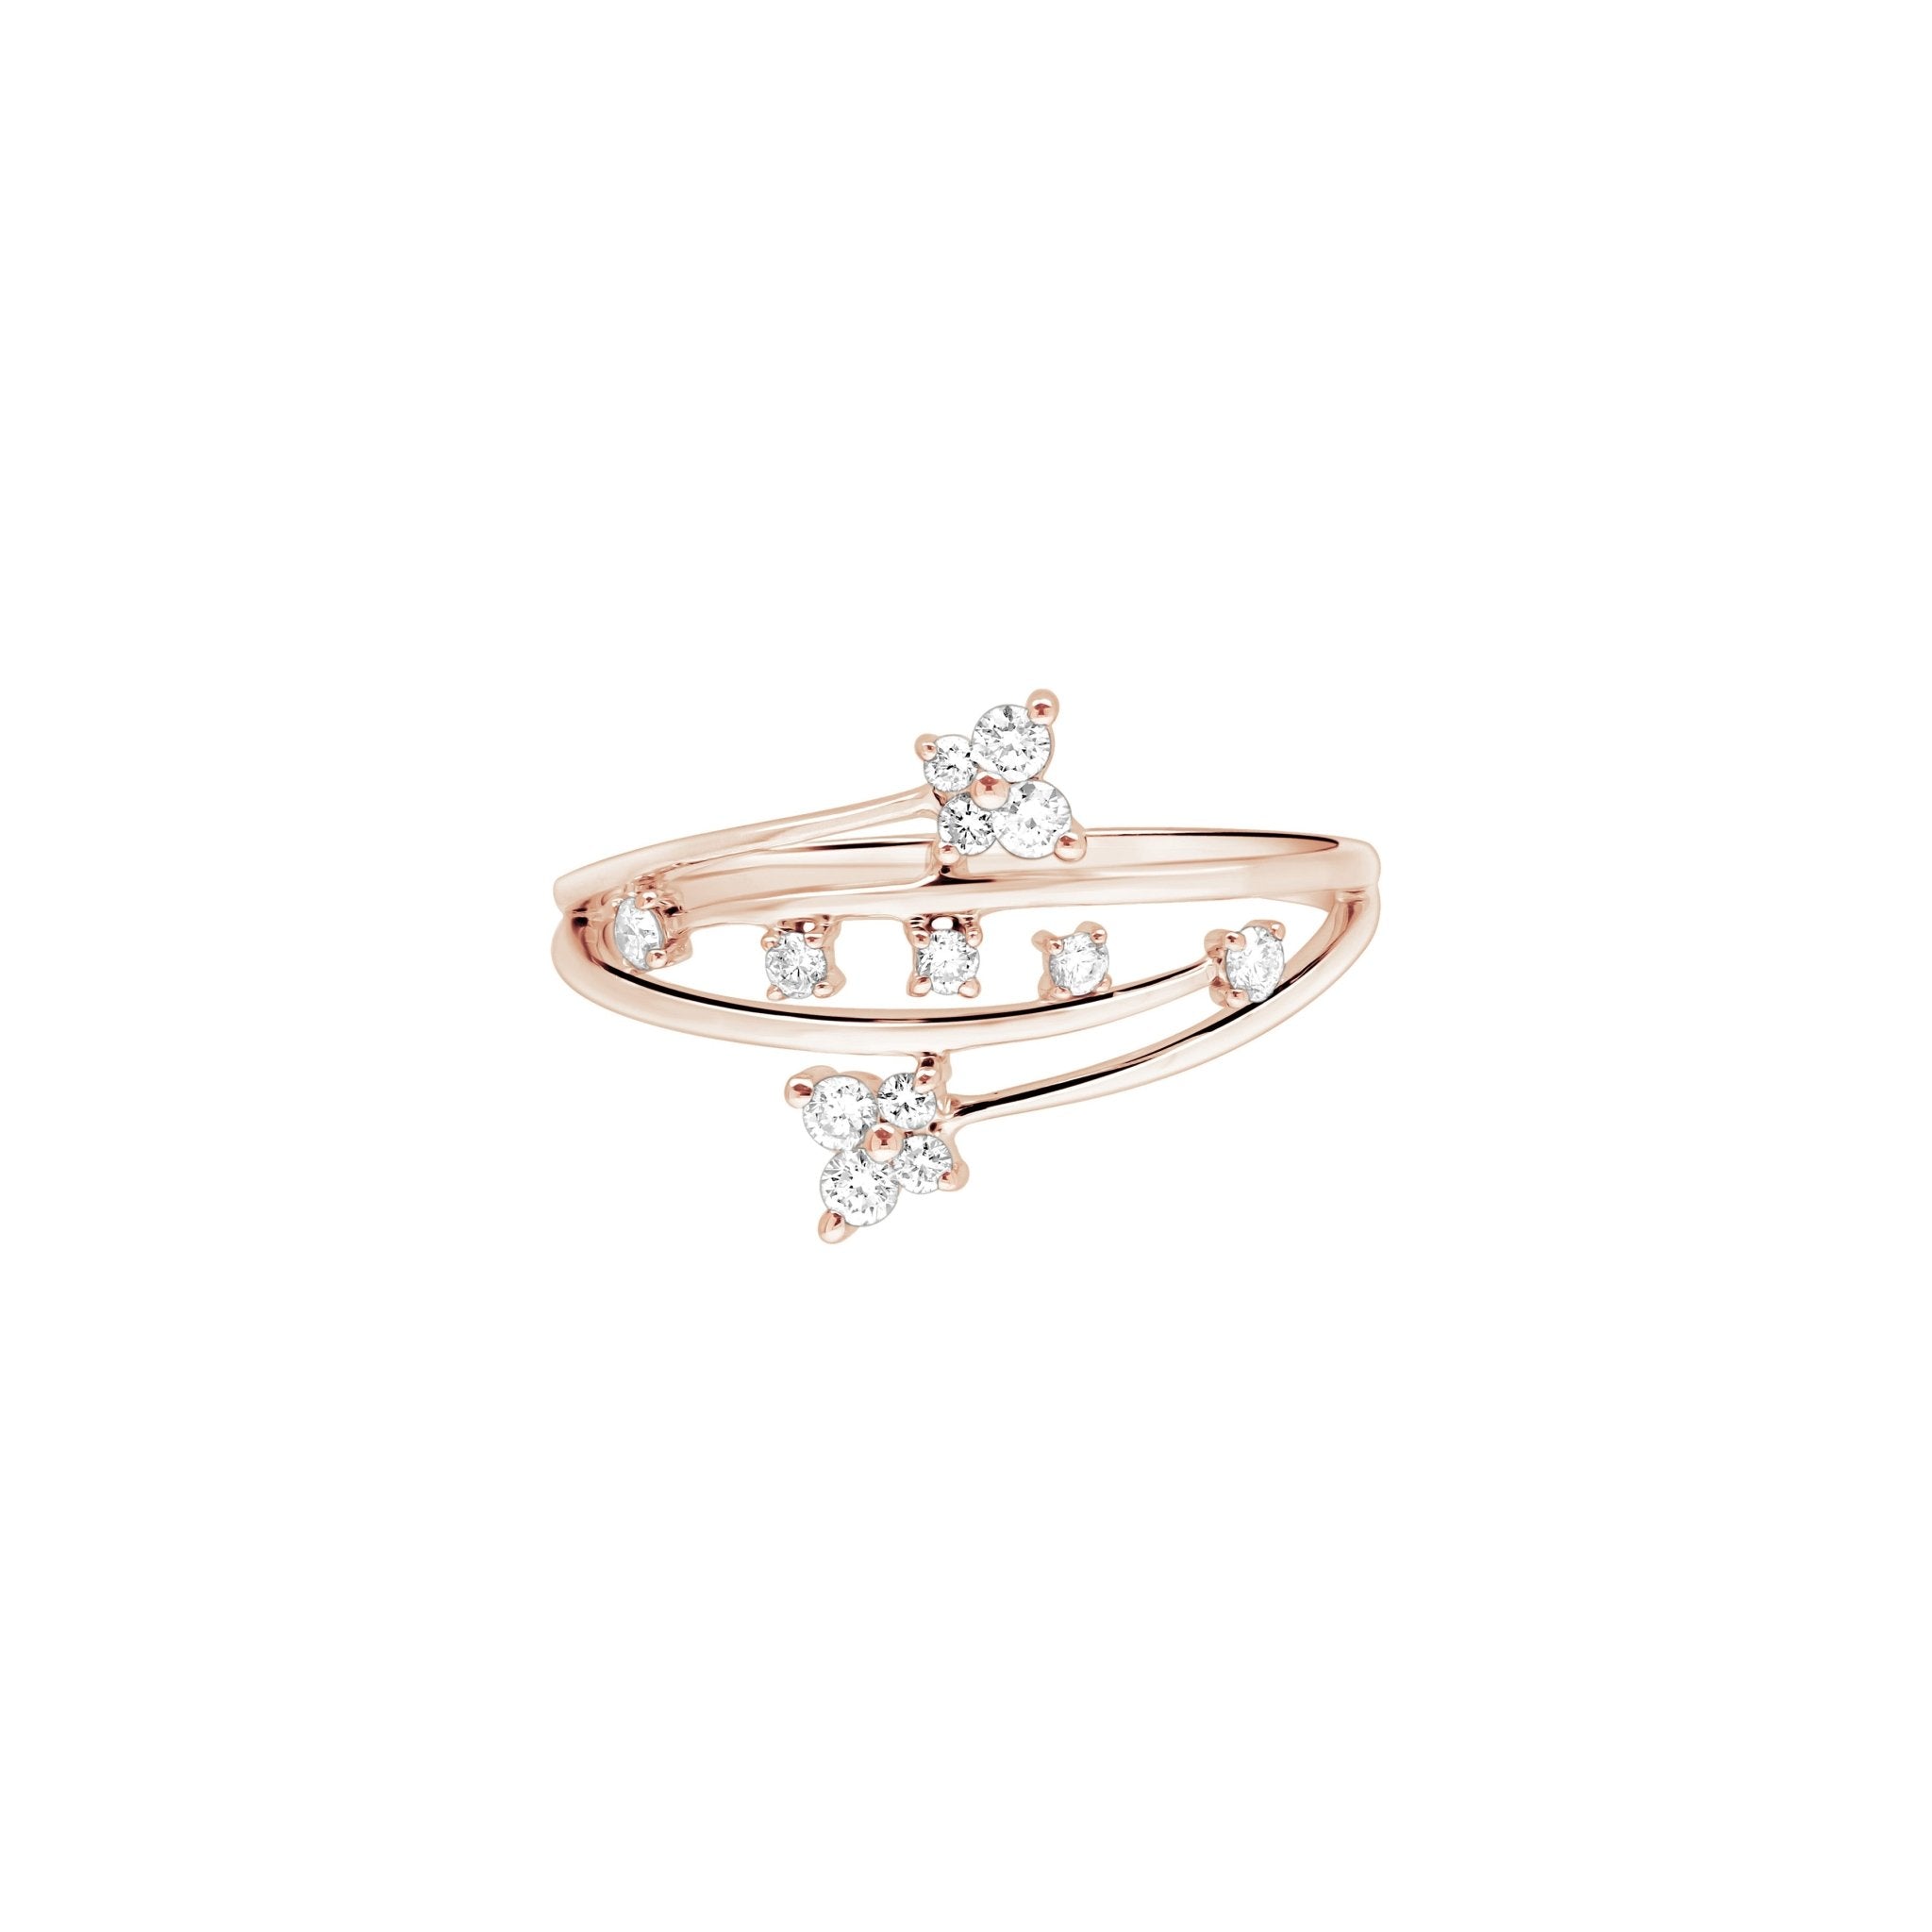 Diamond Butterfly Wrap Cocktail Ring Rings Estella Collection #product_description# 17570 14k April Birthstone Birthstone #tag4# #tag5# #tag6# #tag7# #tag8# #tag9# #tag10# 14K Rose Gold 6